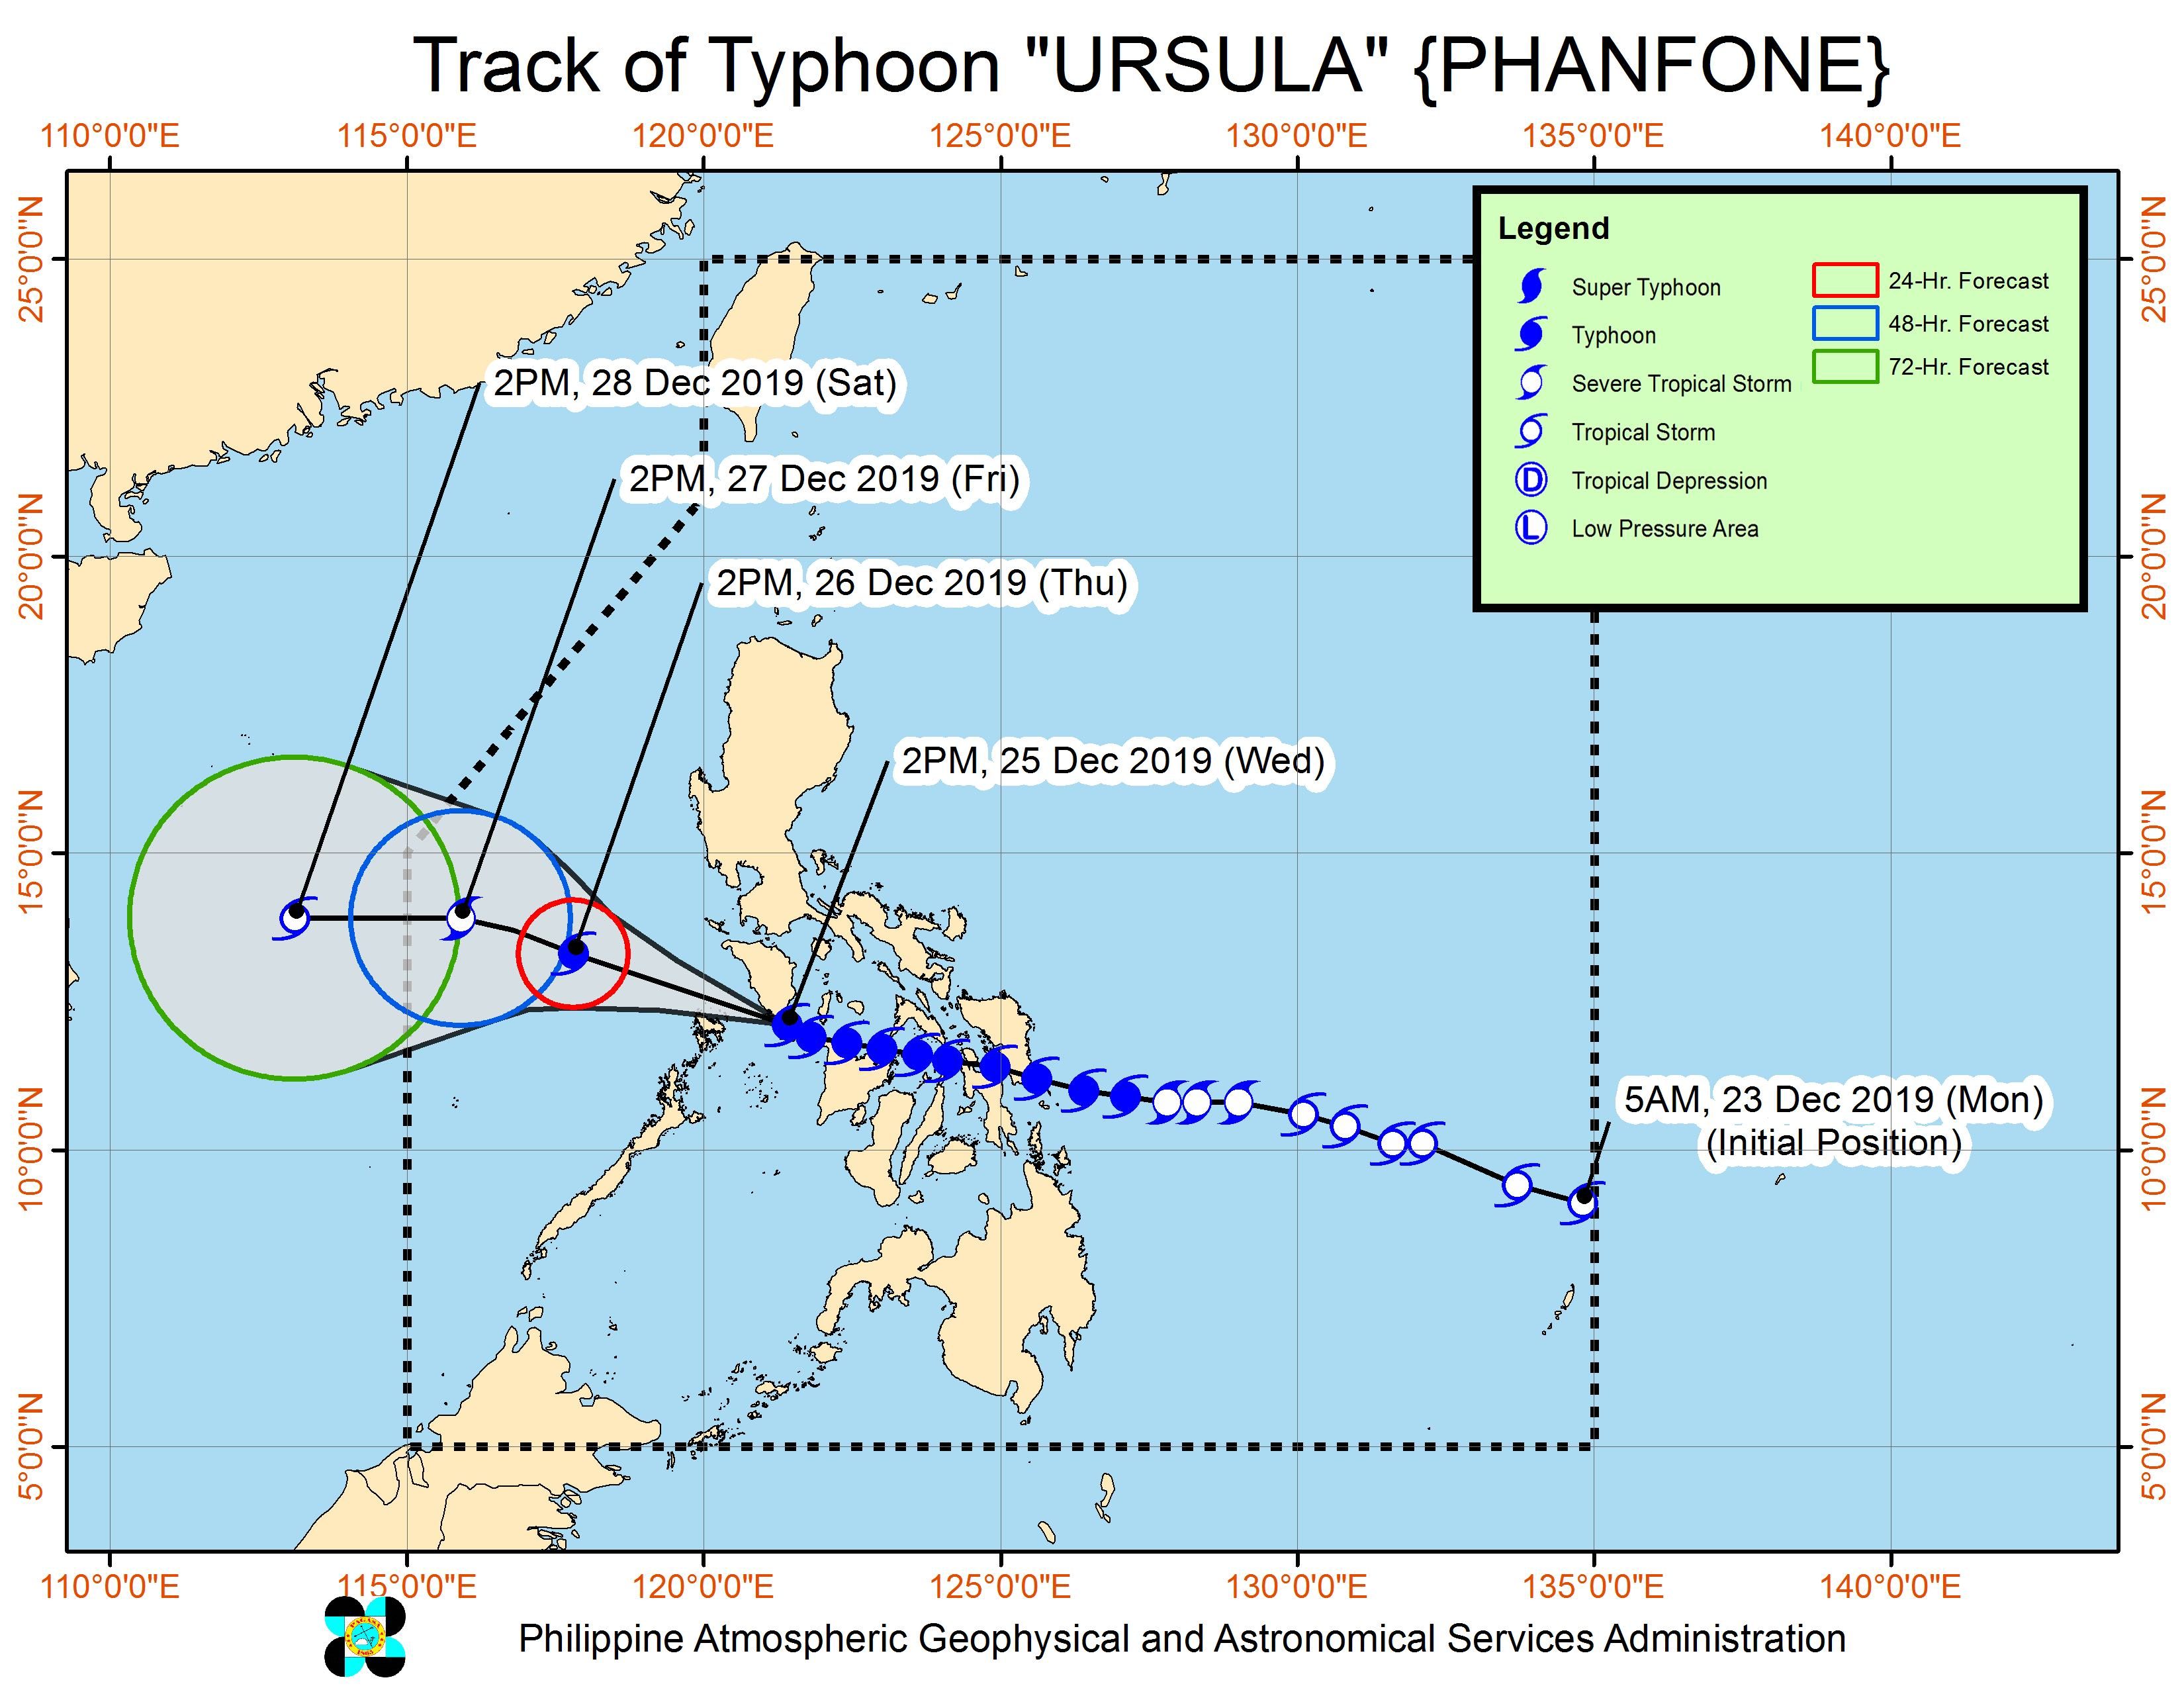 Forecast track of Typhoon Ursula (Phanfone) as of December 25, 2019, 5 pm. Image from PAGASA 